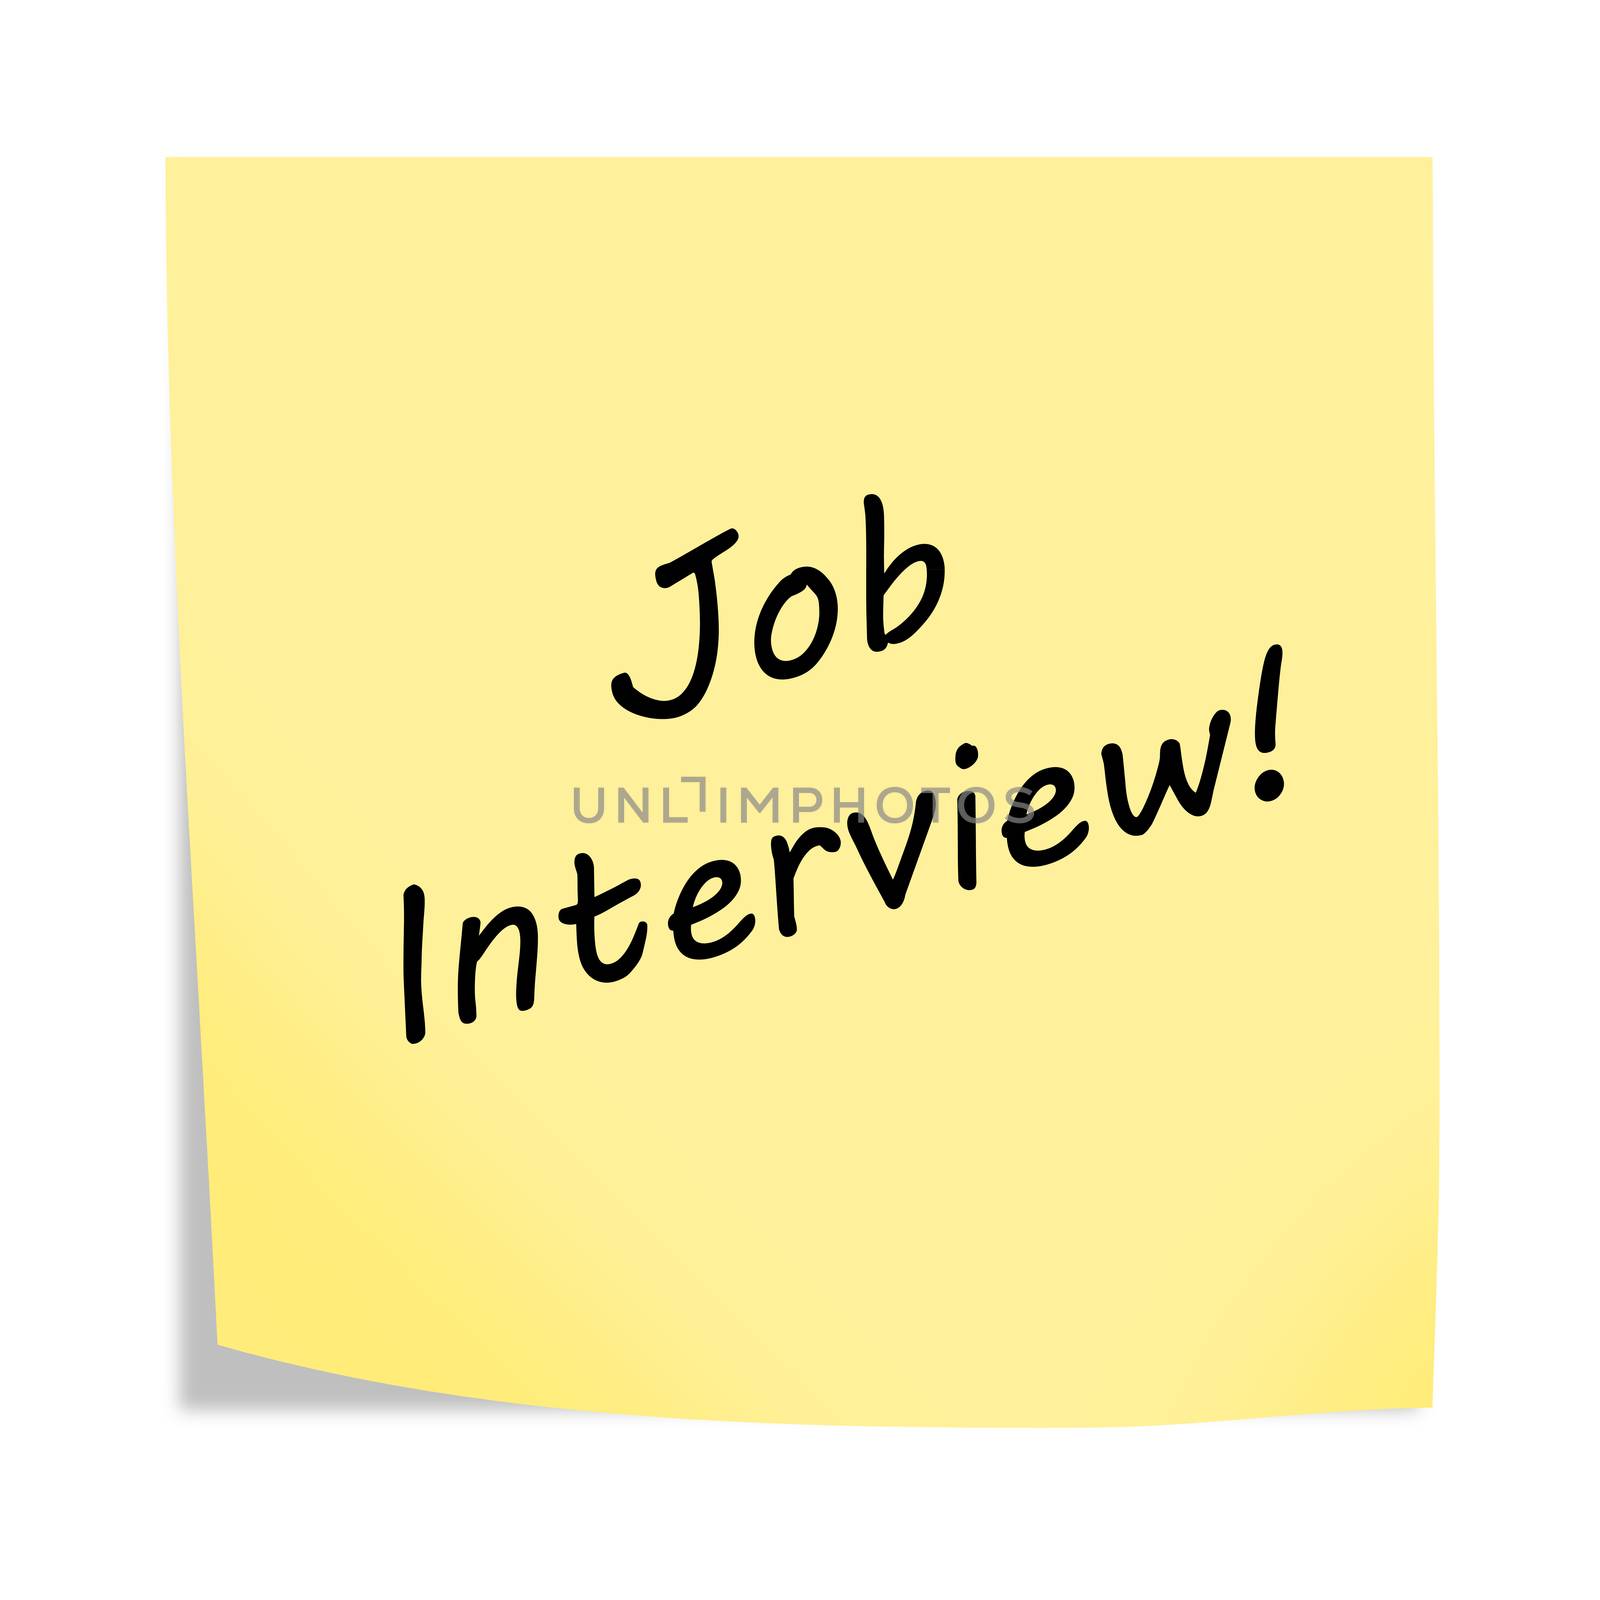 A job interview reminder post note on white background with clipping path